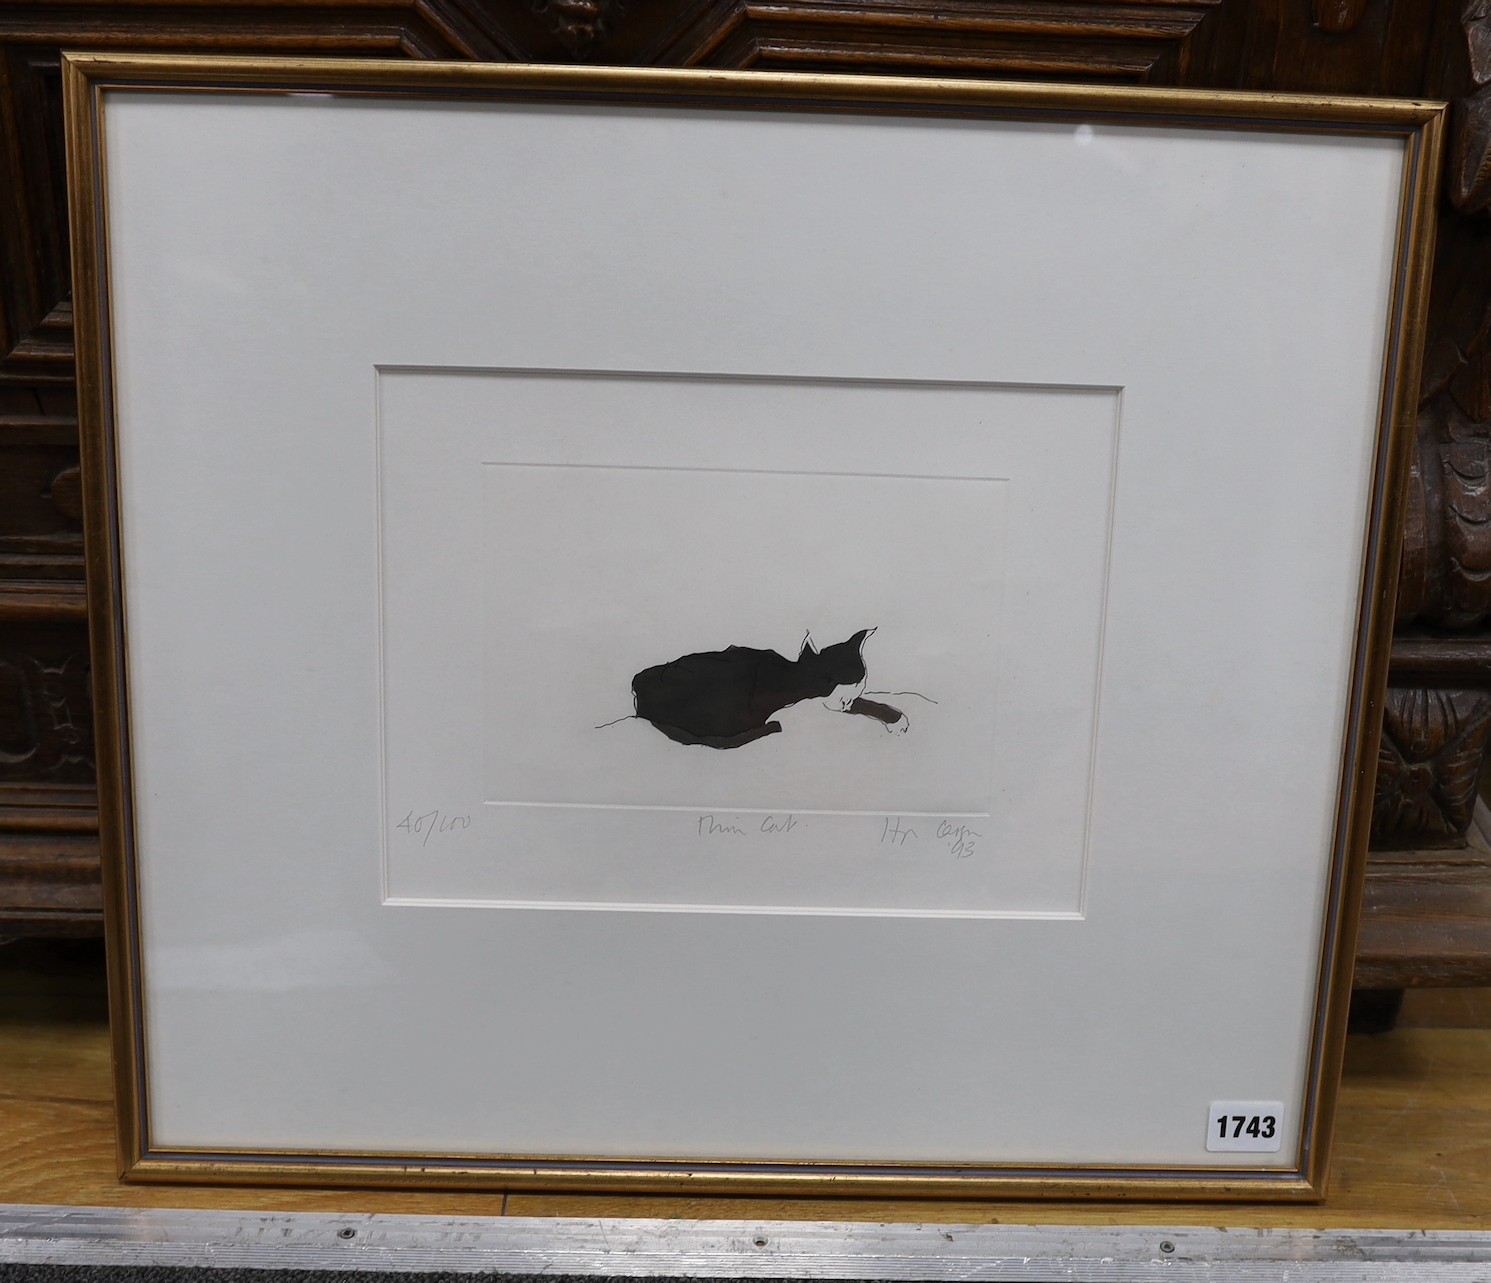 Sir Hugh Casson RA, limited edition print, etching and aquatint, “Cat”, signed and dated ‘93, 40/100, 21 x 28cm